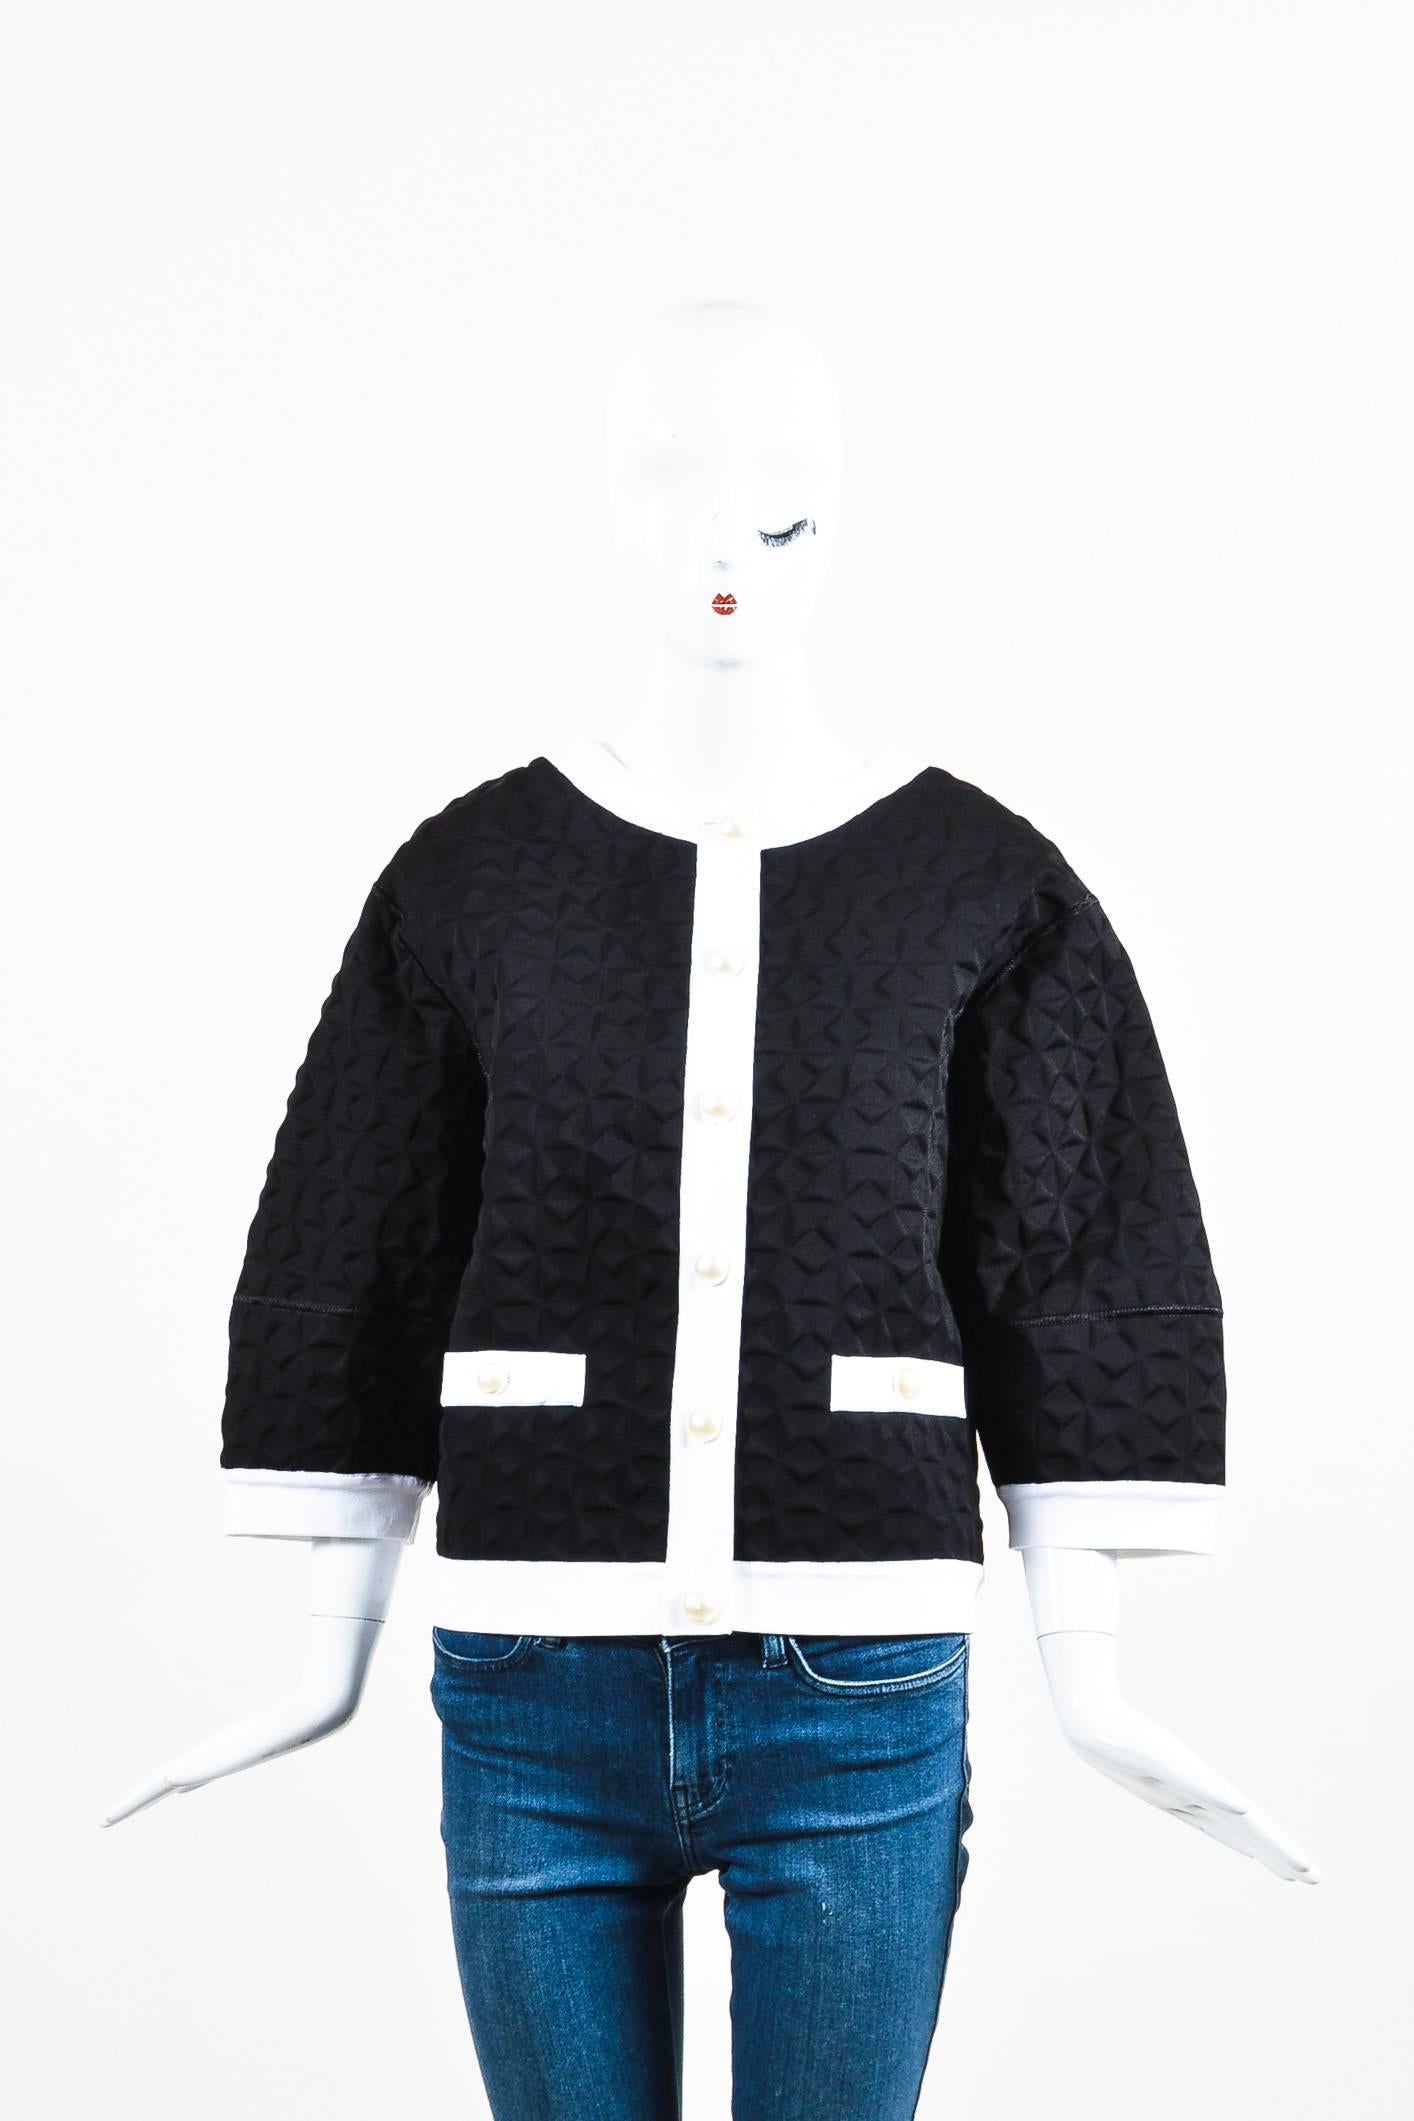 Retails for $4245. Chic and modern Chanel jacket in a textured design. Black and white colorway with a stiff material and ribbed trims. Cropped sleeves with drop shoulders. Faux pearl buttons at the front closure and pockets. Relaxed, boxy shape.